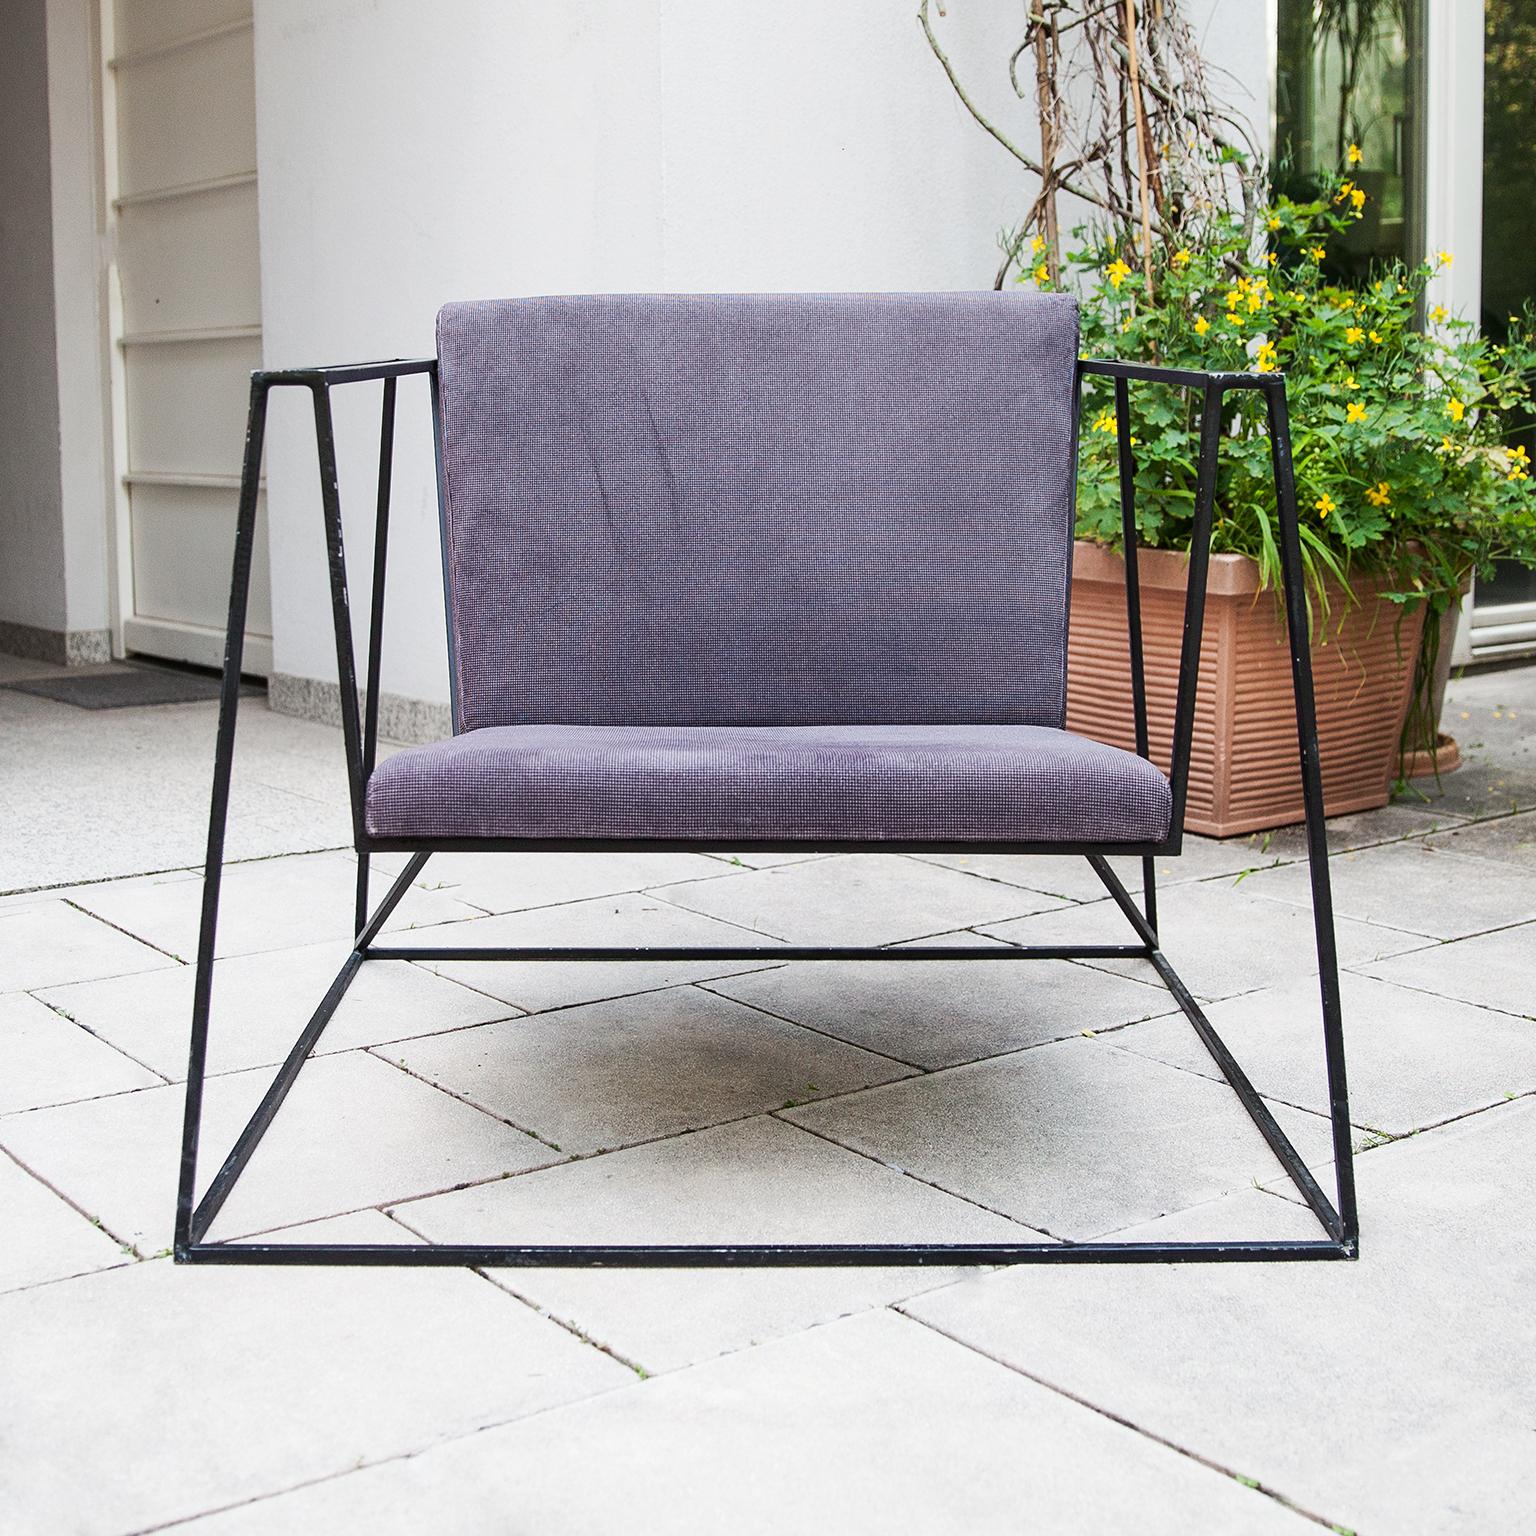 Cubistic and very minimalistic armchair attributed to Netherlands 1980s.

Measures: 76 H x 93 W x 93 D cm SH 39.